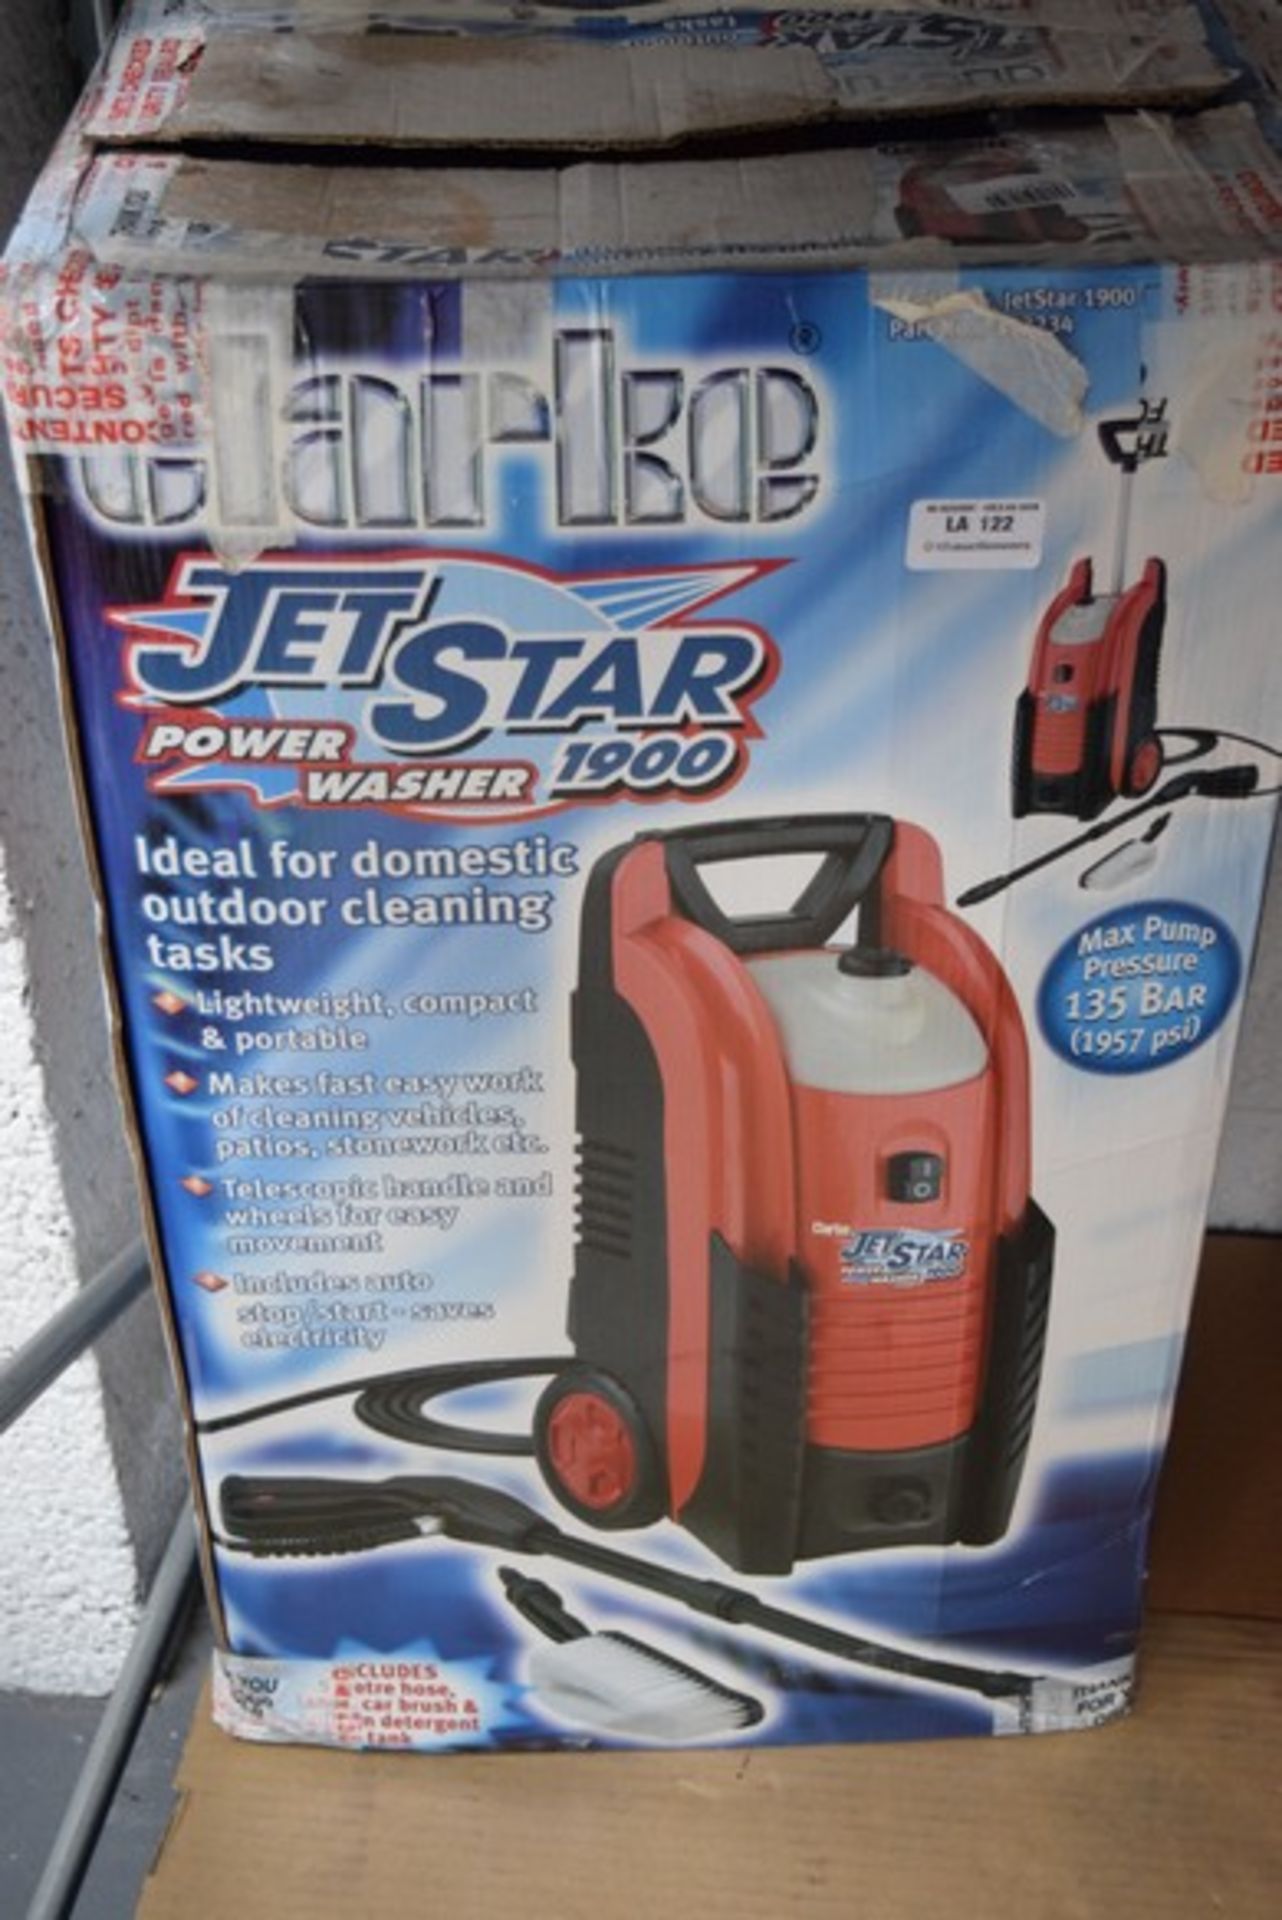 1 x BOXED CLARKE JET STAR 1900 POWER WASHER RRP £120 10.08.17 *PLEASE NOTE THAT THE BID PRICE IS